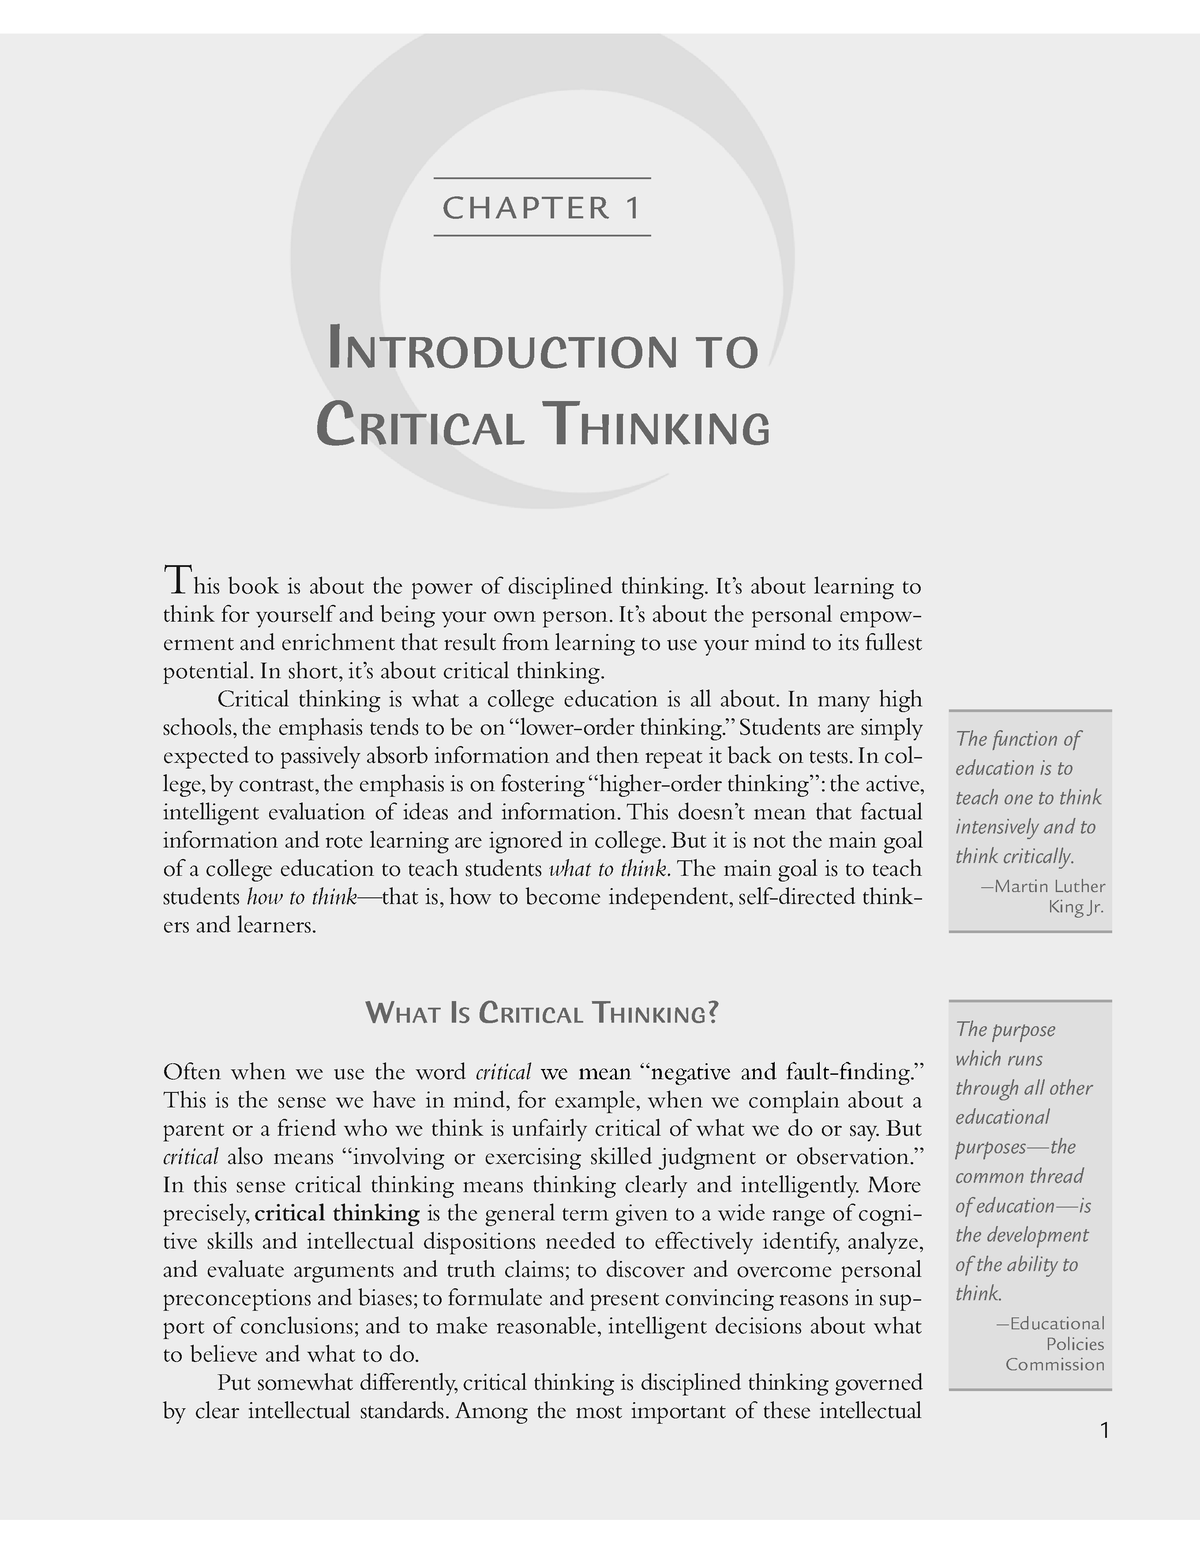 assignment 8.2 critical thinking